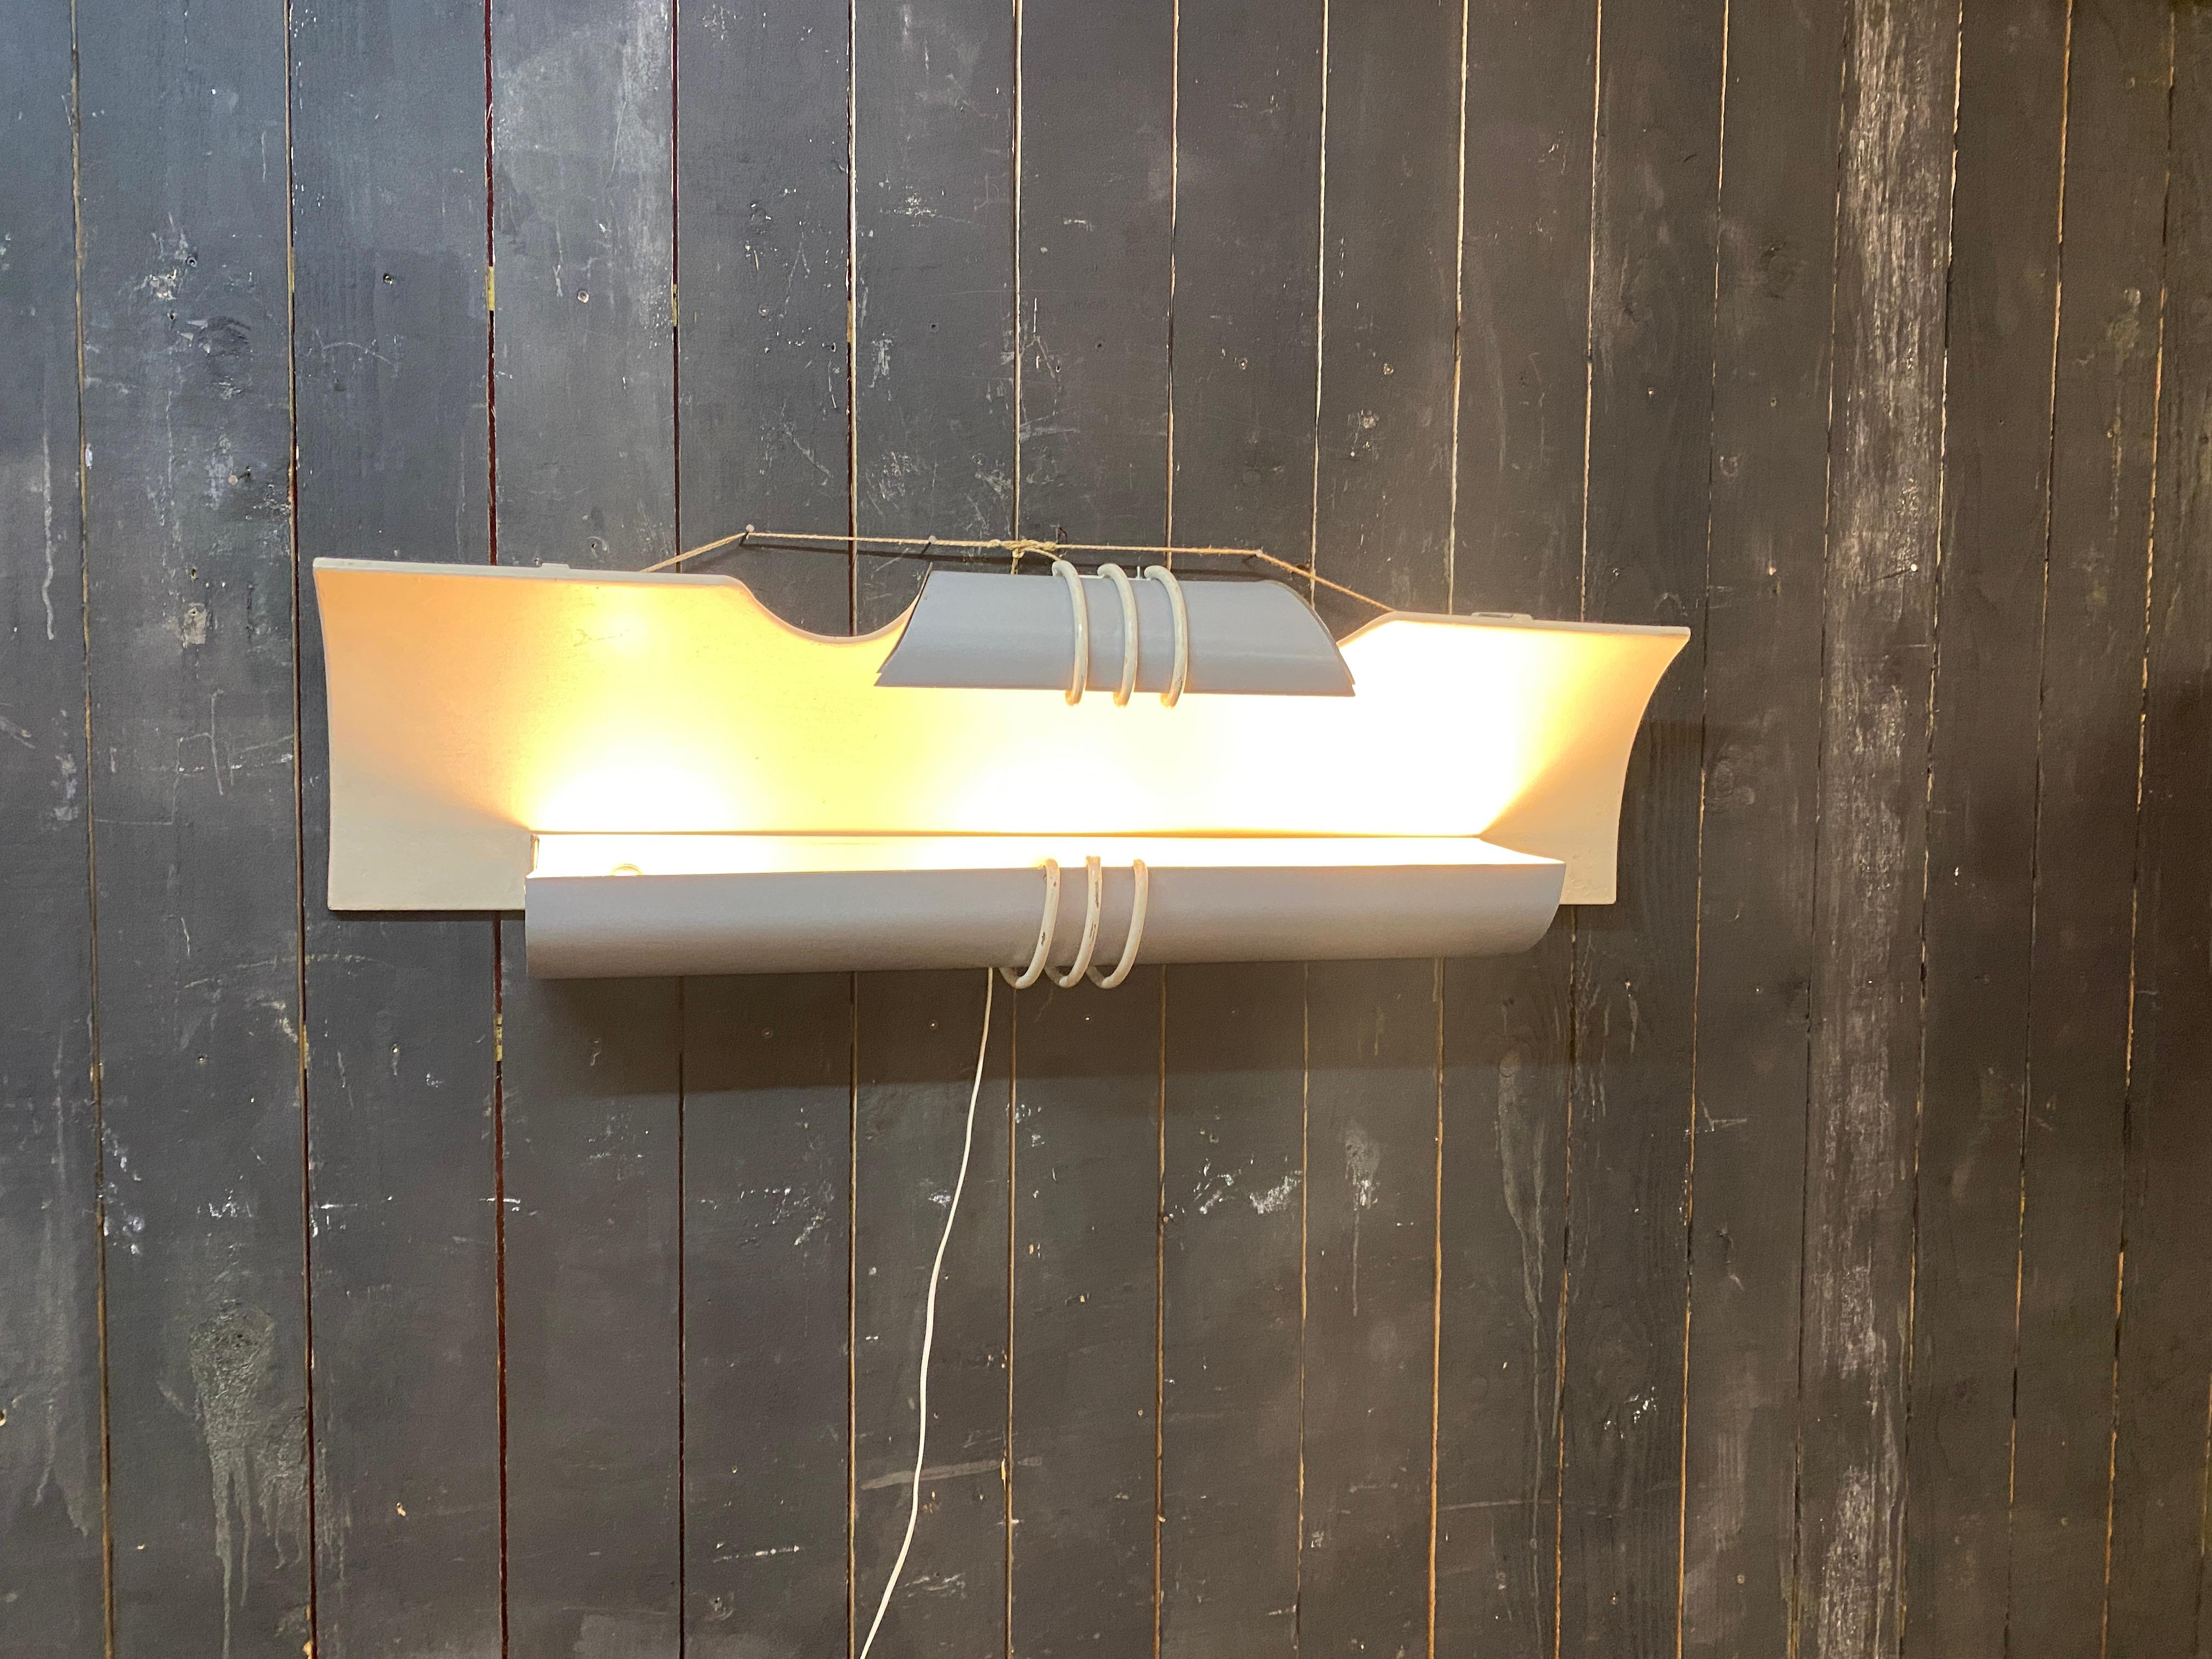 2 large wall lights circa 1970/1980, from a cinema
unlit the color of the metal is light gray and white